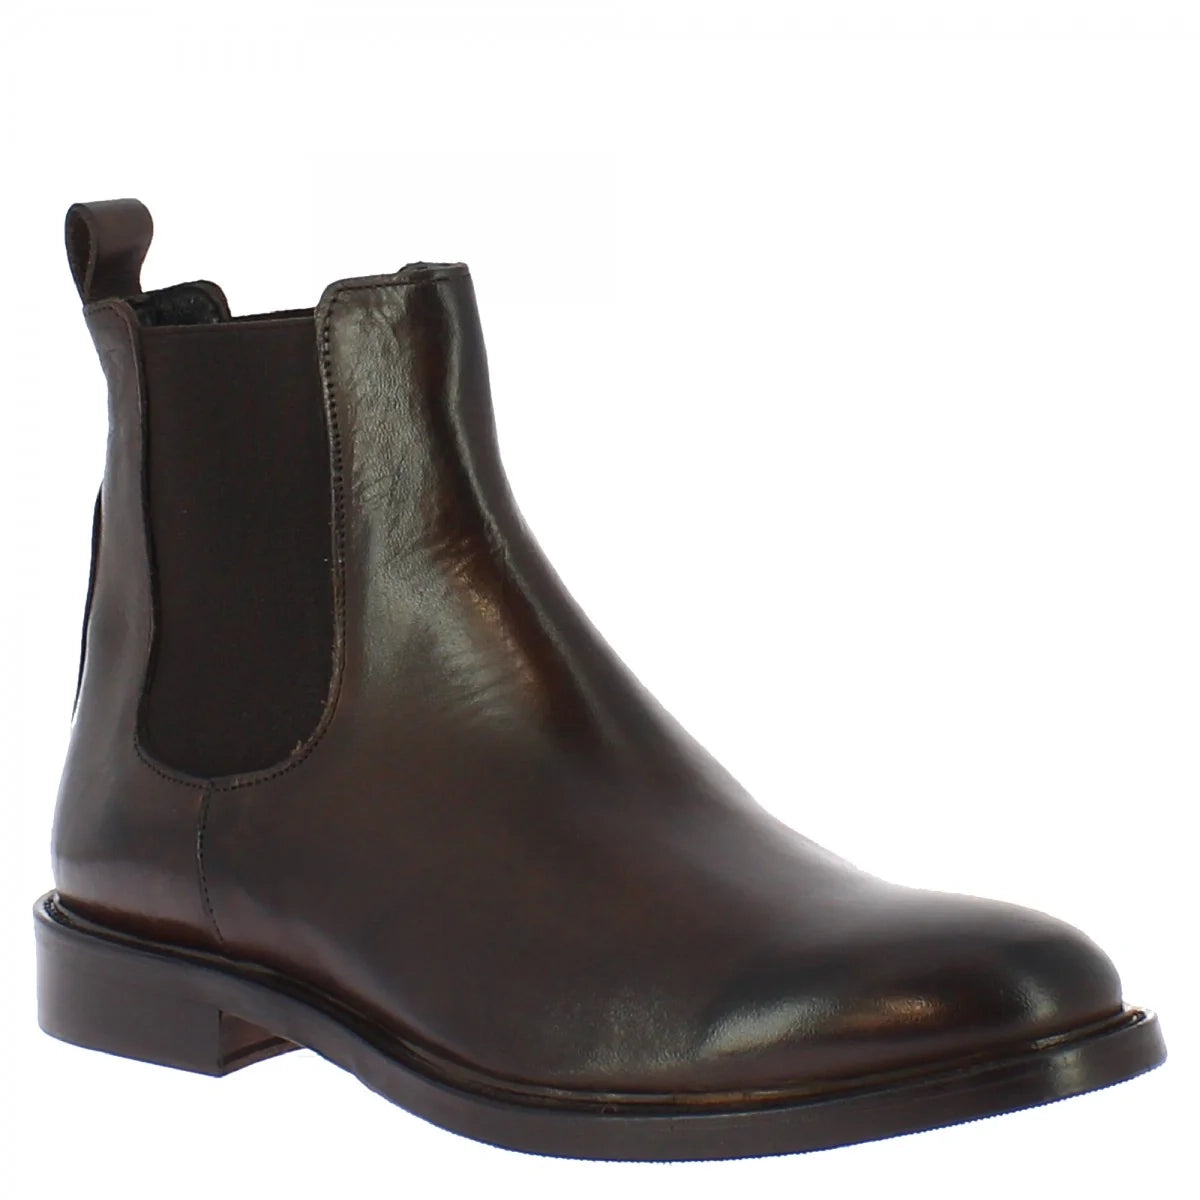 Brown leather handmade ankle boots